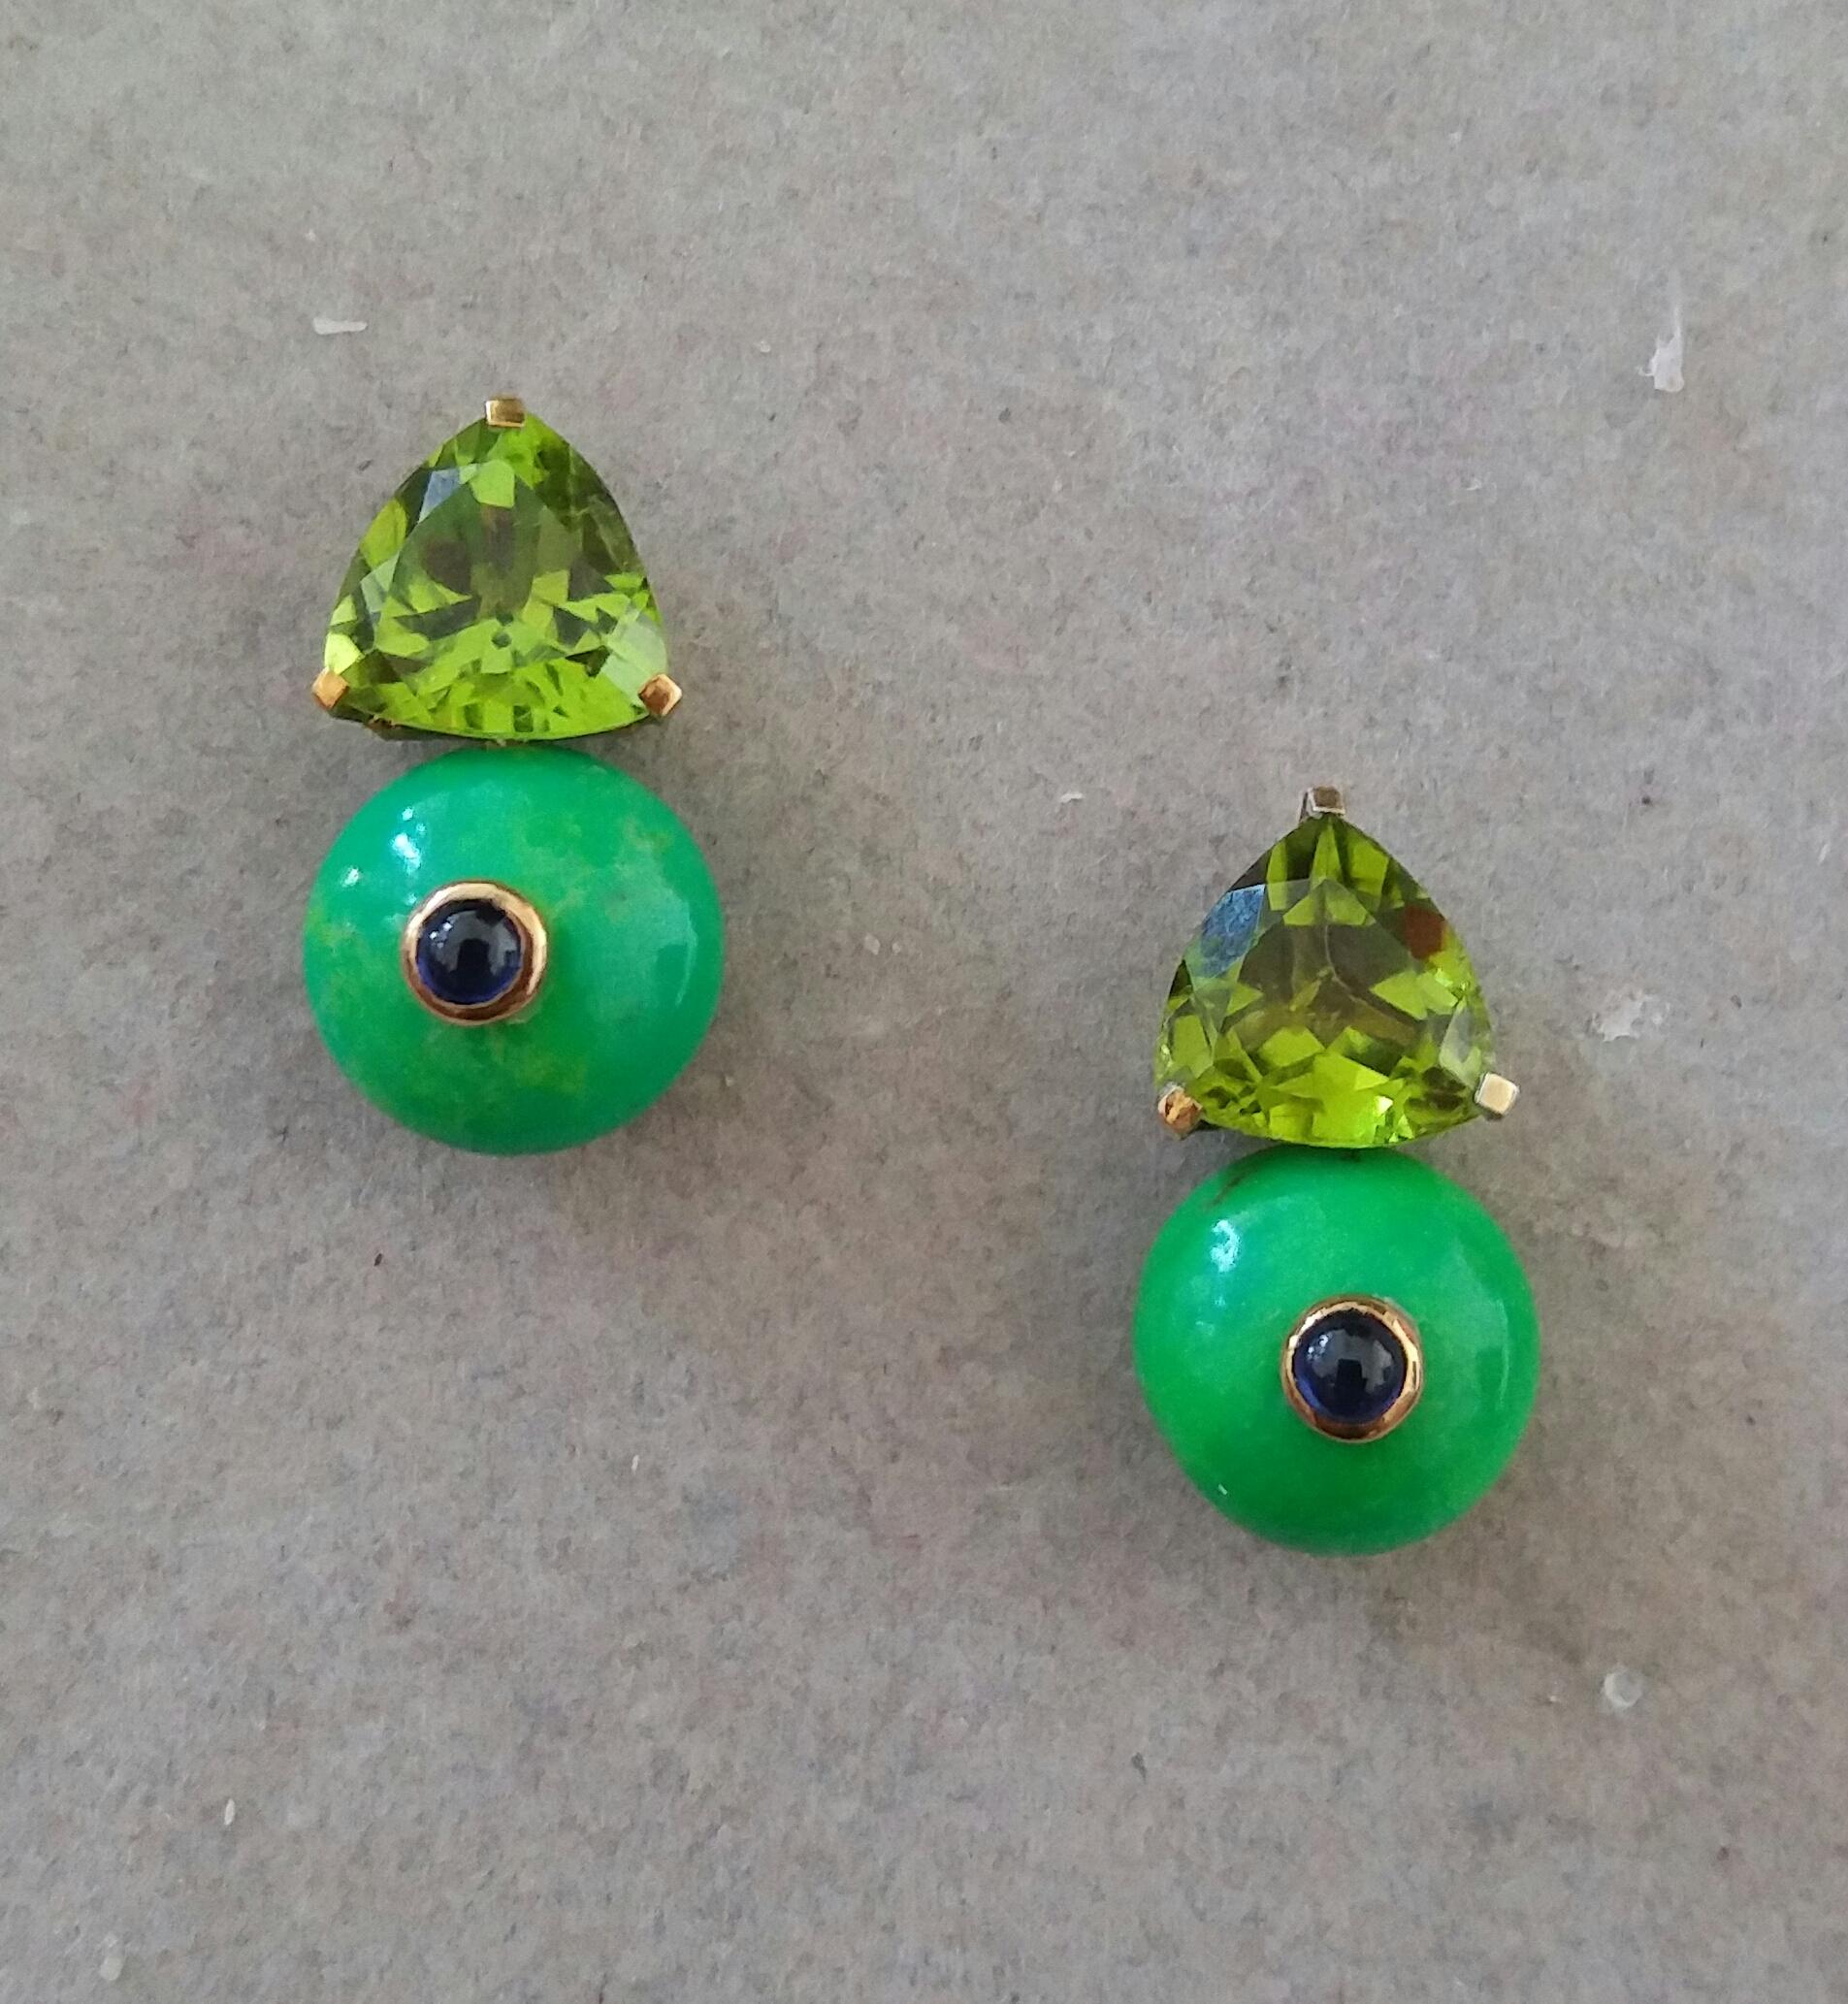 Simple chic stud earrings with a pair of Trillion Cut Peridots measuring 10mm x10 mm set in solid 14 Kt. yellow gold on the top and in the lower parts 2 Turkmenistan Green Turquoise round buttons of 12 mm in diameter,with 2 small 3mm round Blue